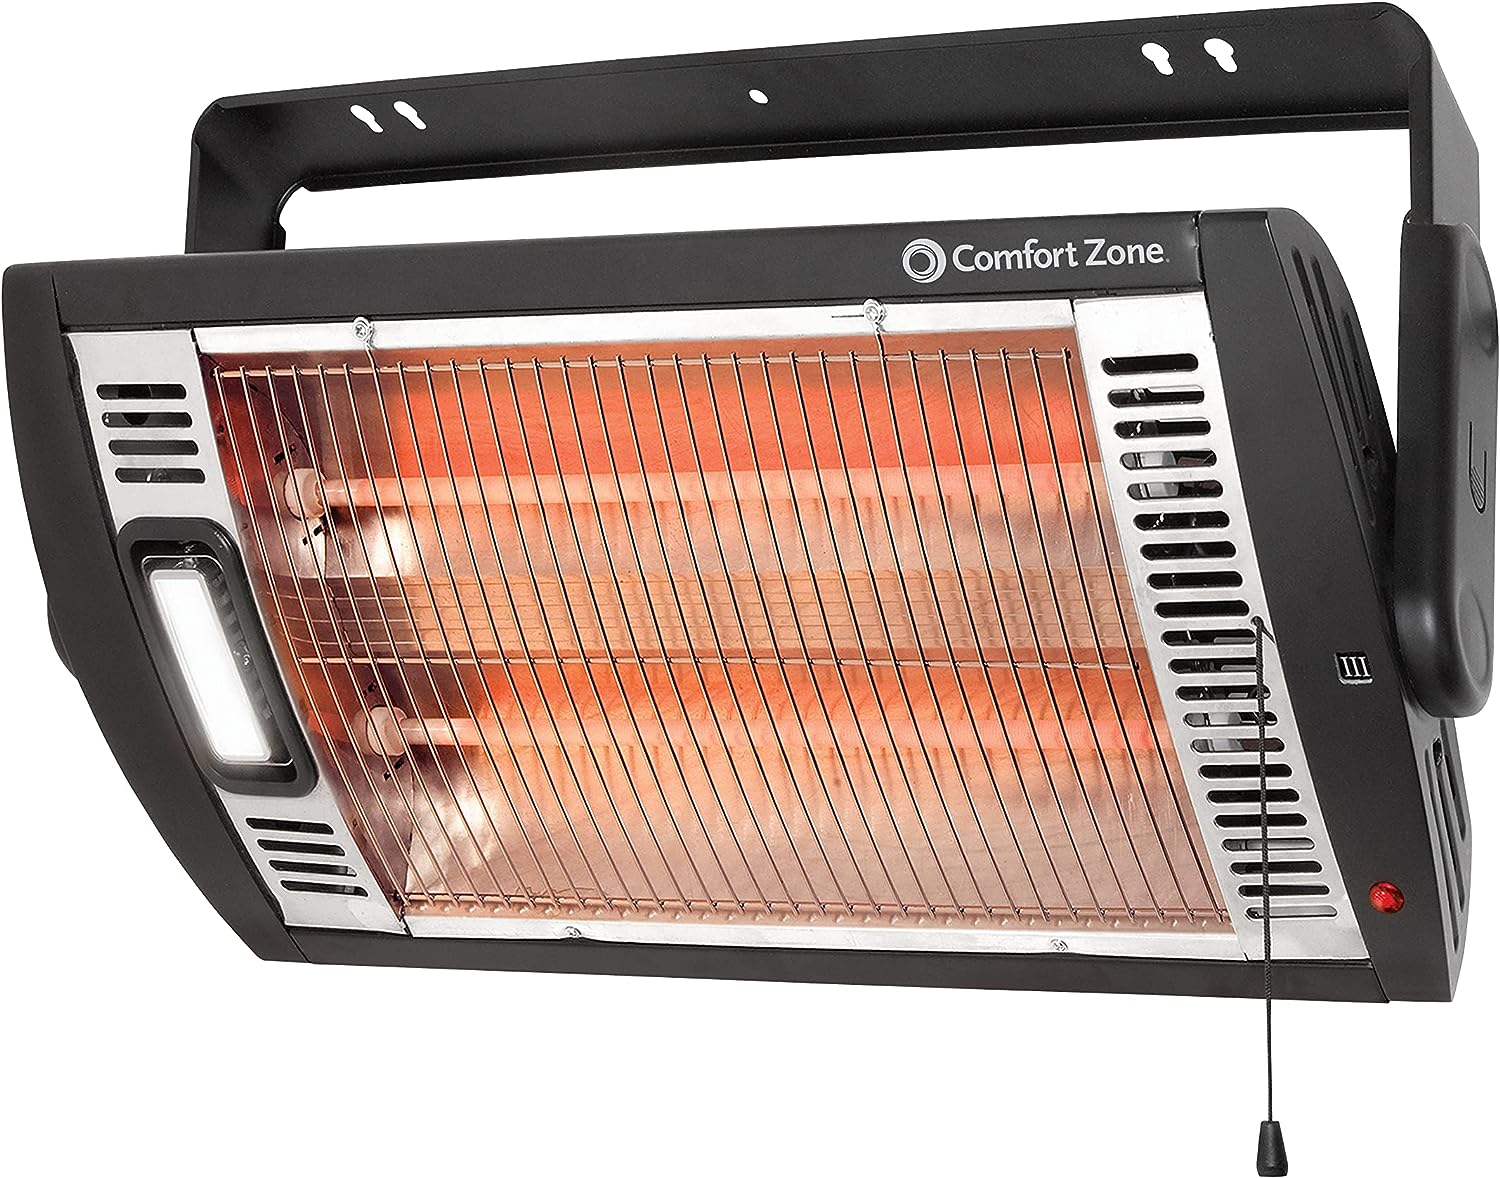 Comfort Zone CZQTV5M 750/1,500-Watt Ceiling Mounted Dual Quartz Radiant Heater with 90-Degree Adjustable Tilt, Metal Safety Grille, Overheat Protection (Hardware Included)